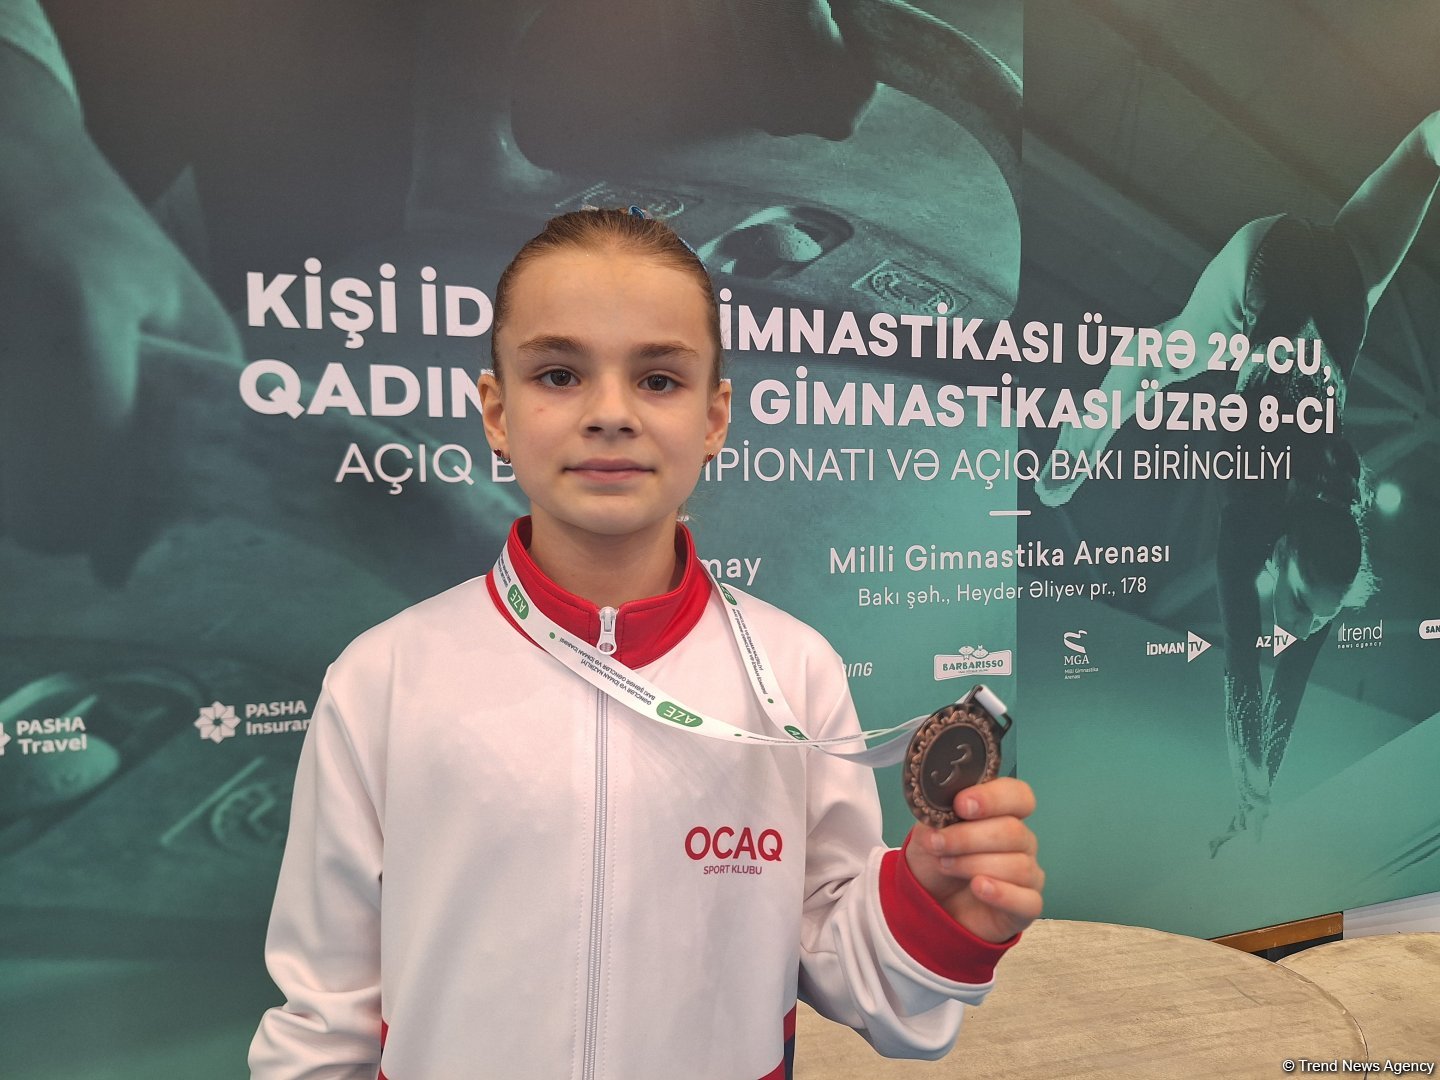 Supportive family members' attendance proves utmost important - young Azerbaijani gymnast